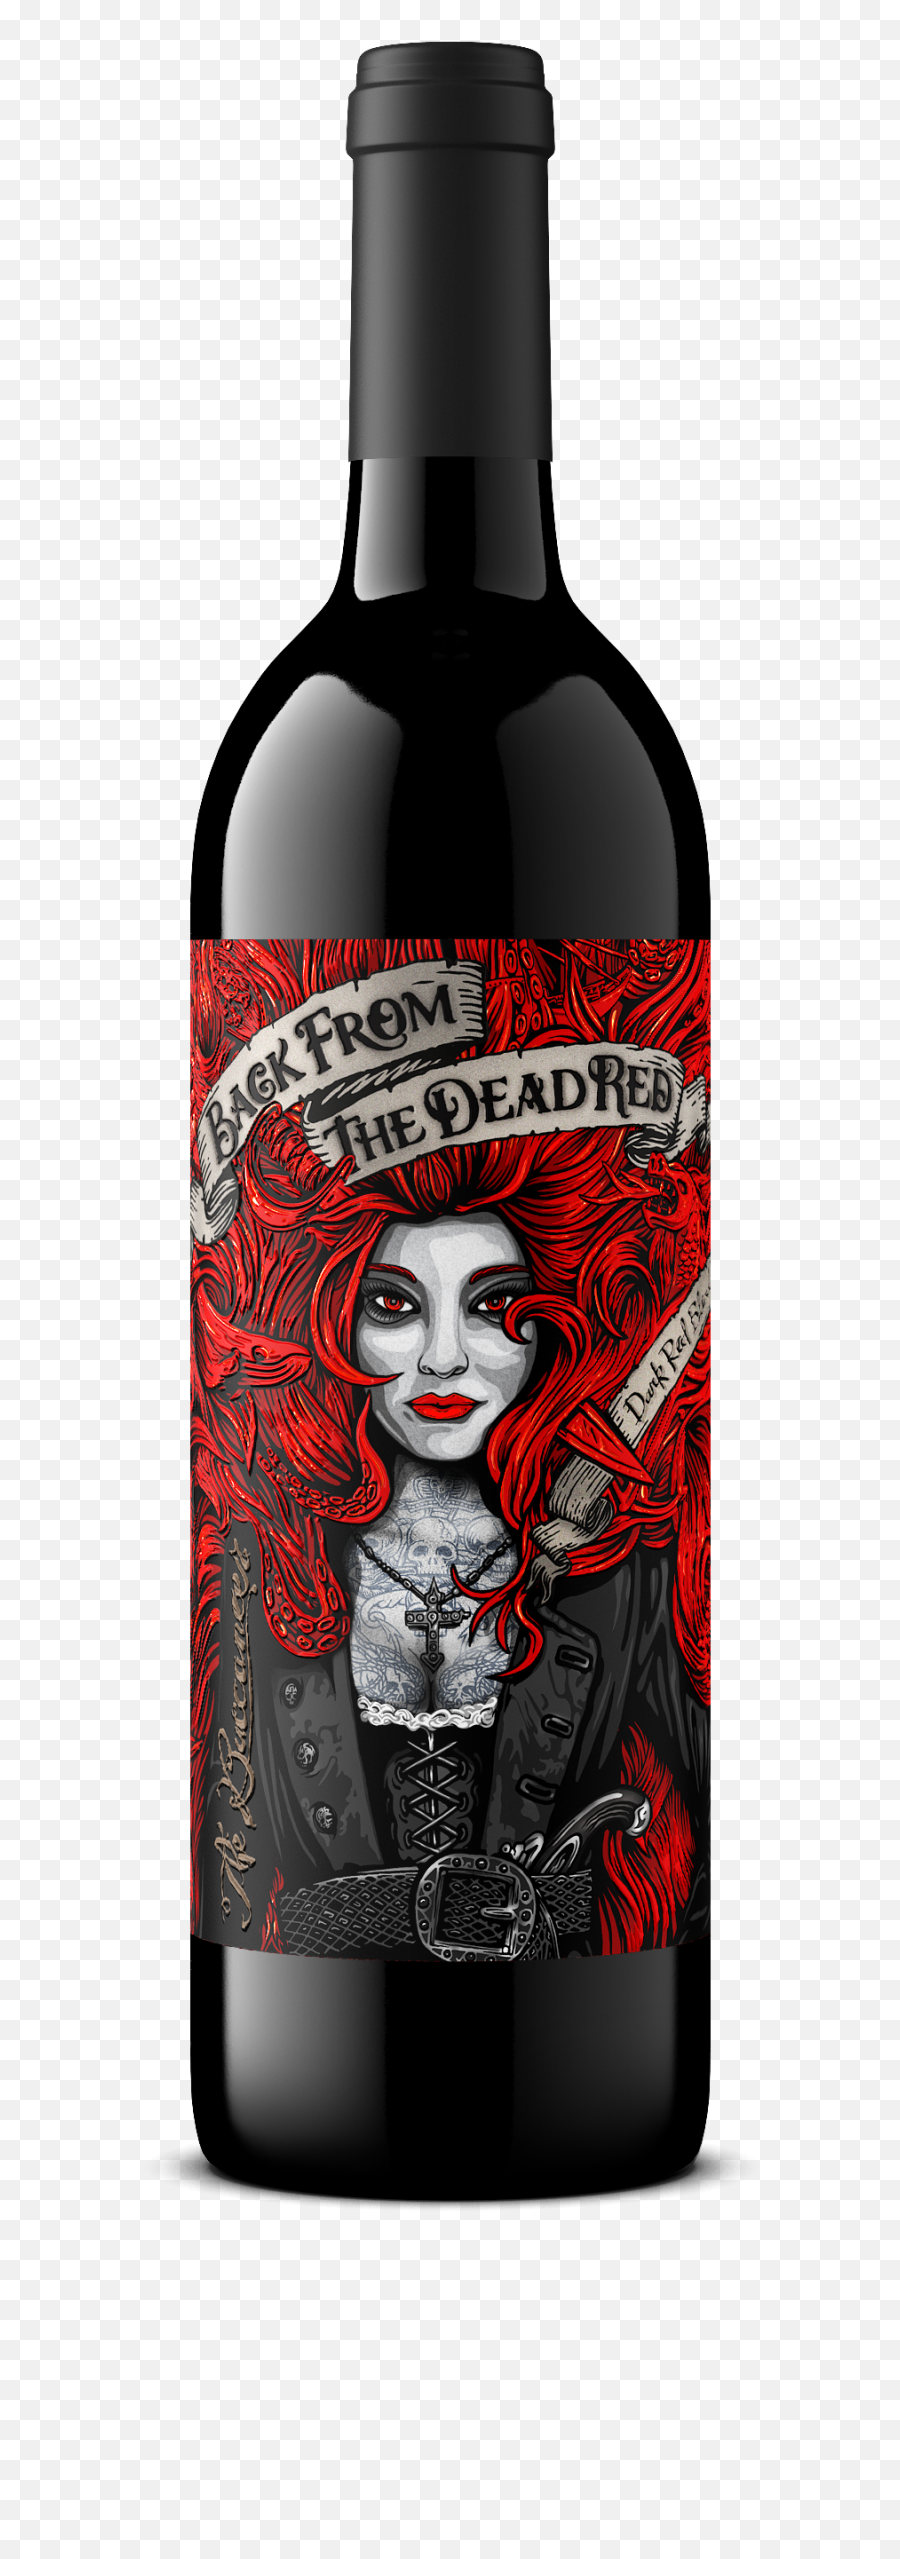 Plata Wines Wine Partners Png Rp Icon Red Hair